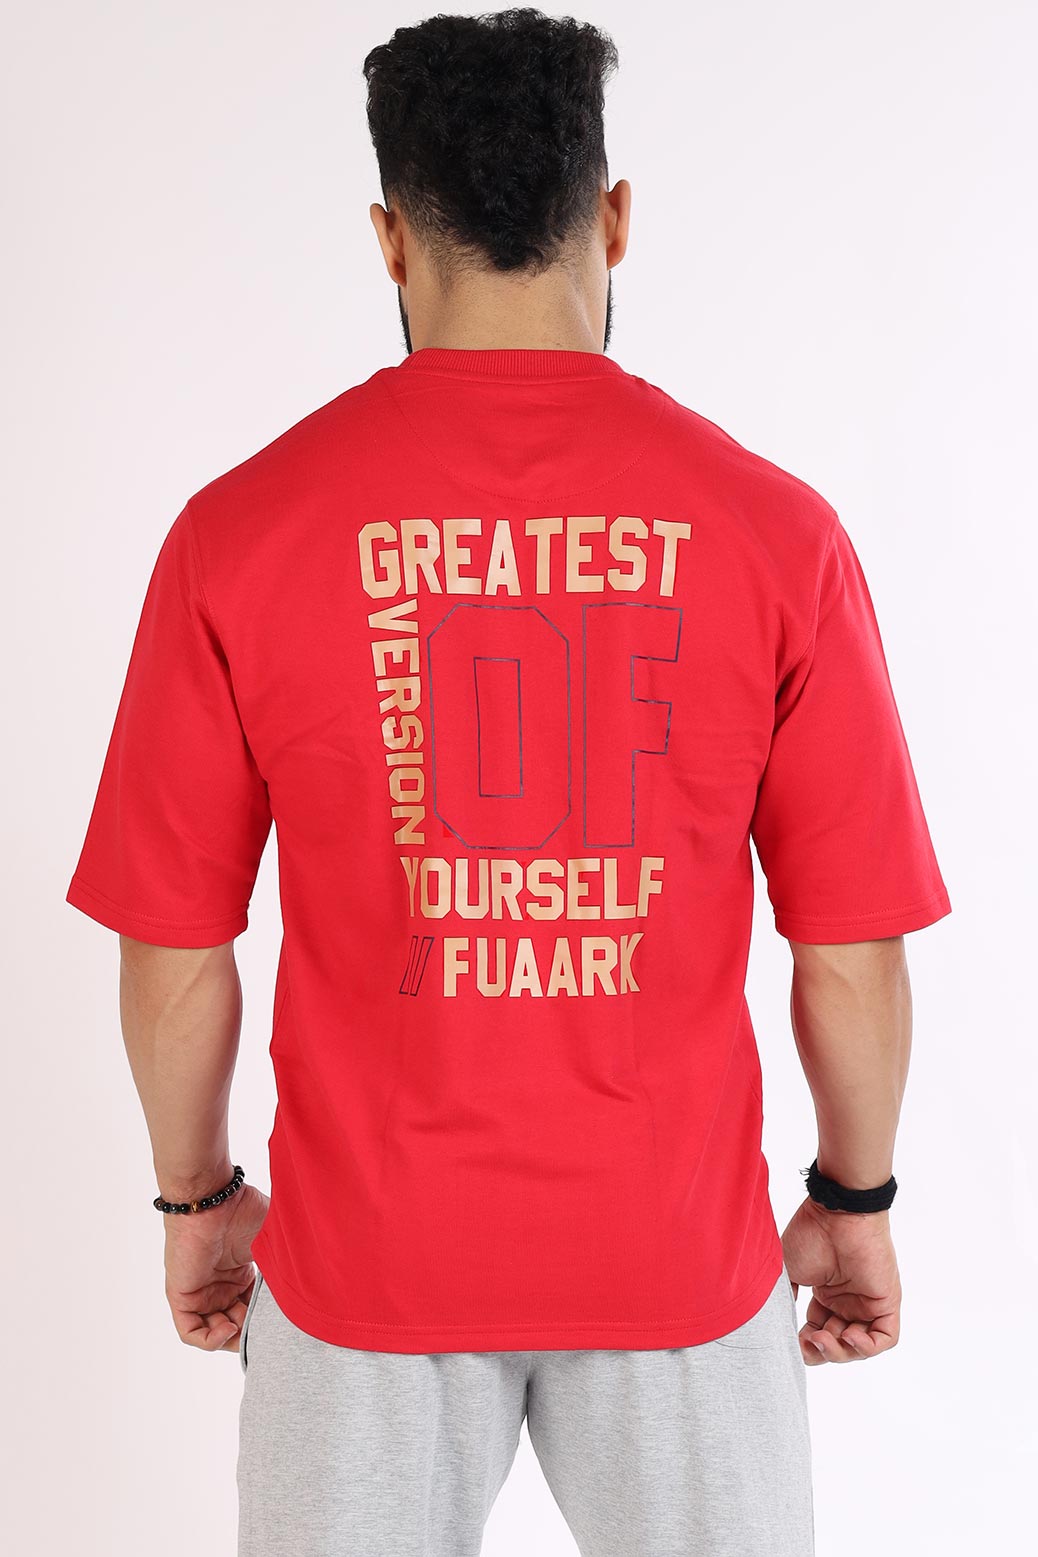 Greatest Oversized T-shirt Red